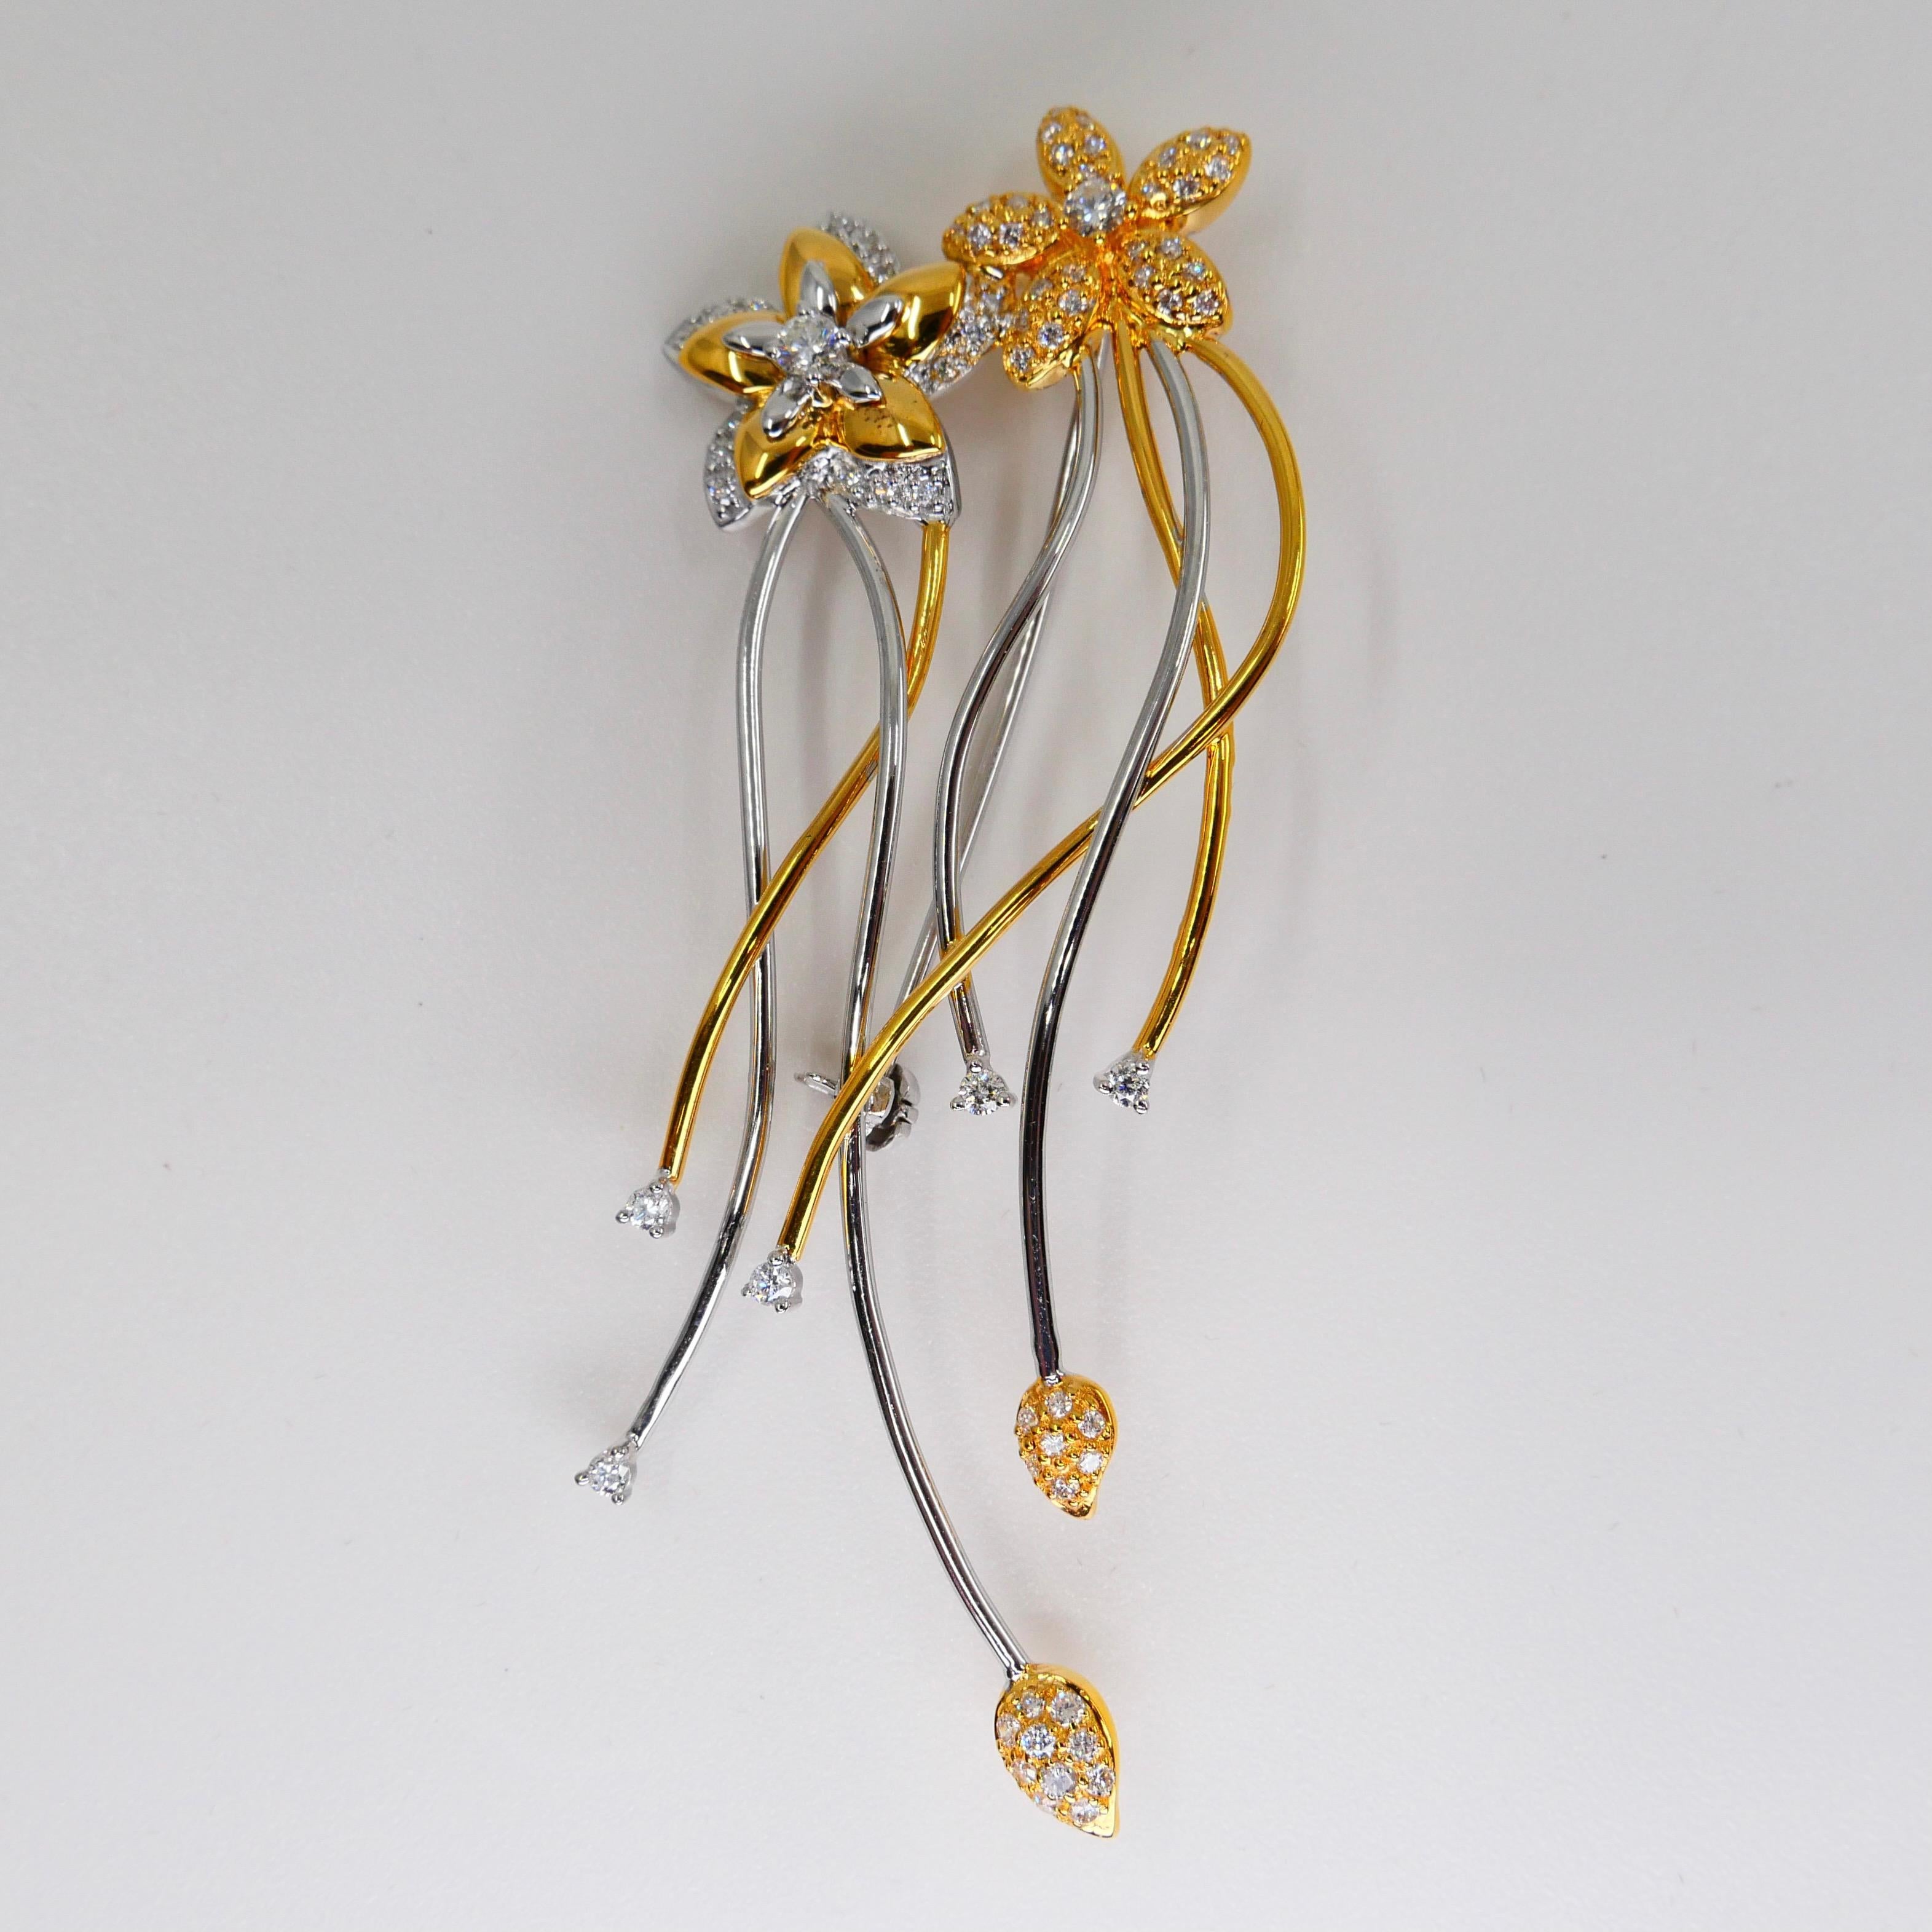 18K Two Tone White & Yellow Gold, Diamond Flower Brooch, Beautiful Workmanship For Sale 1